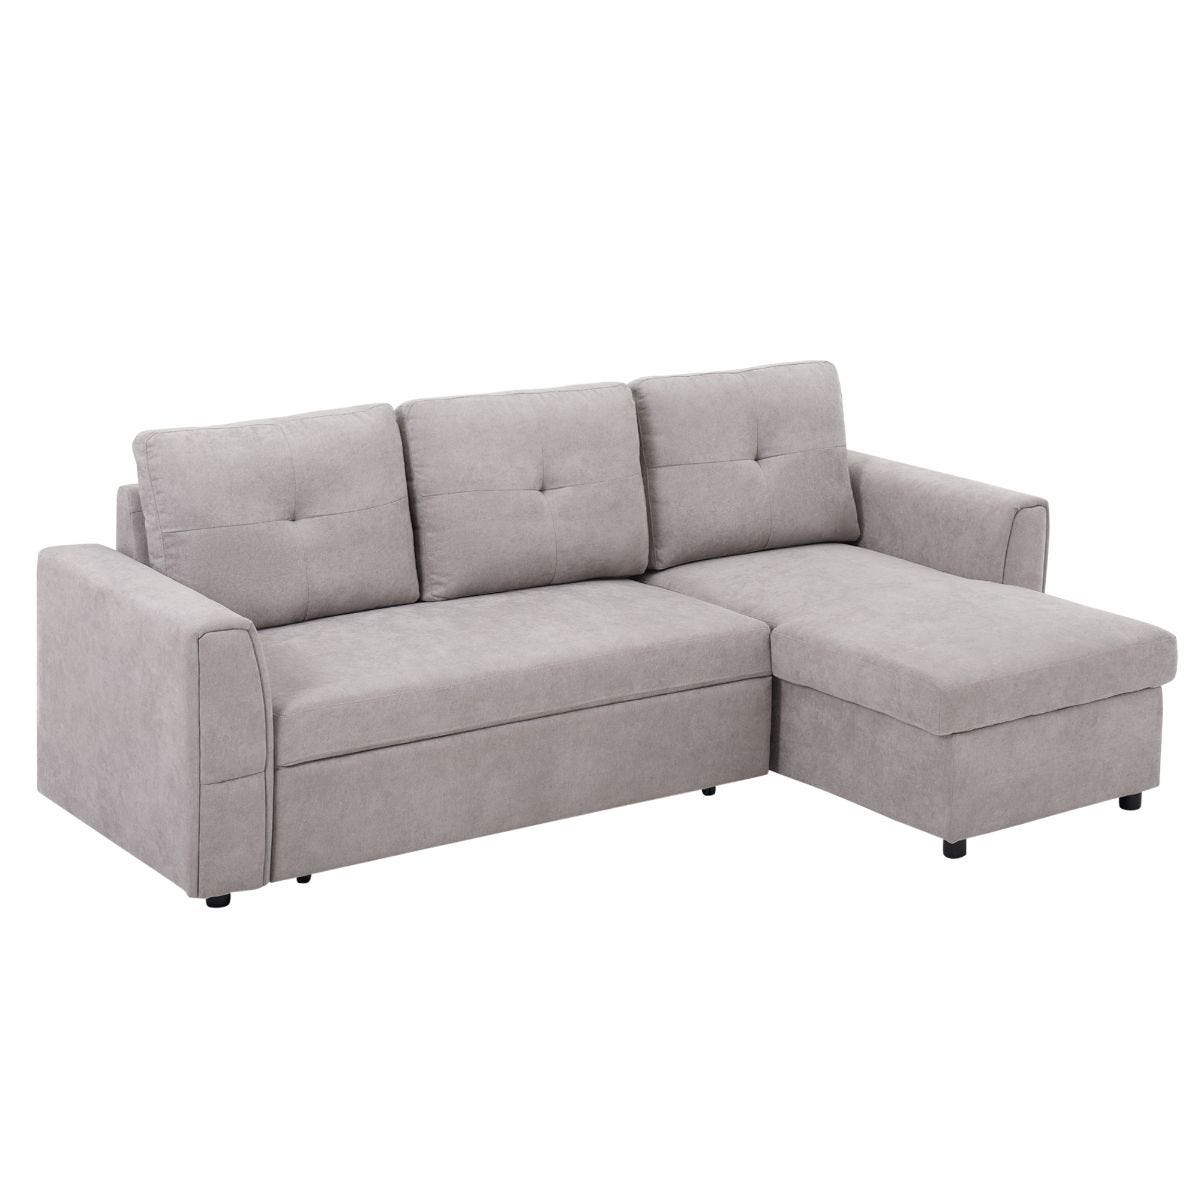 Homcom Upholstered Linen Look L Shaped Sofa Bed With Storage Grey